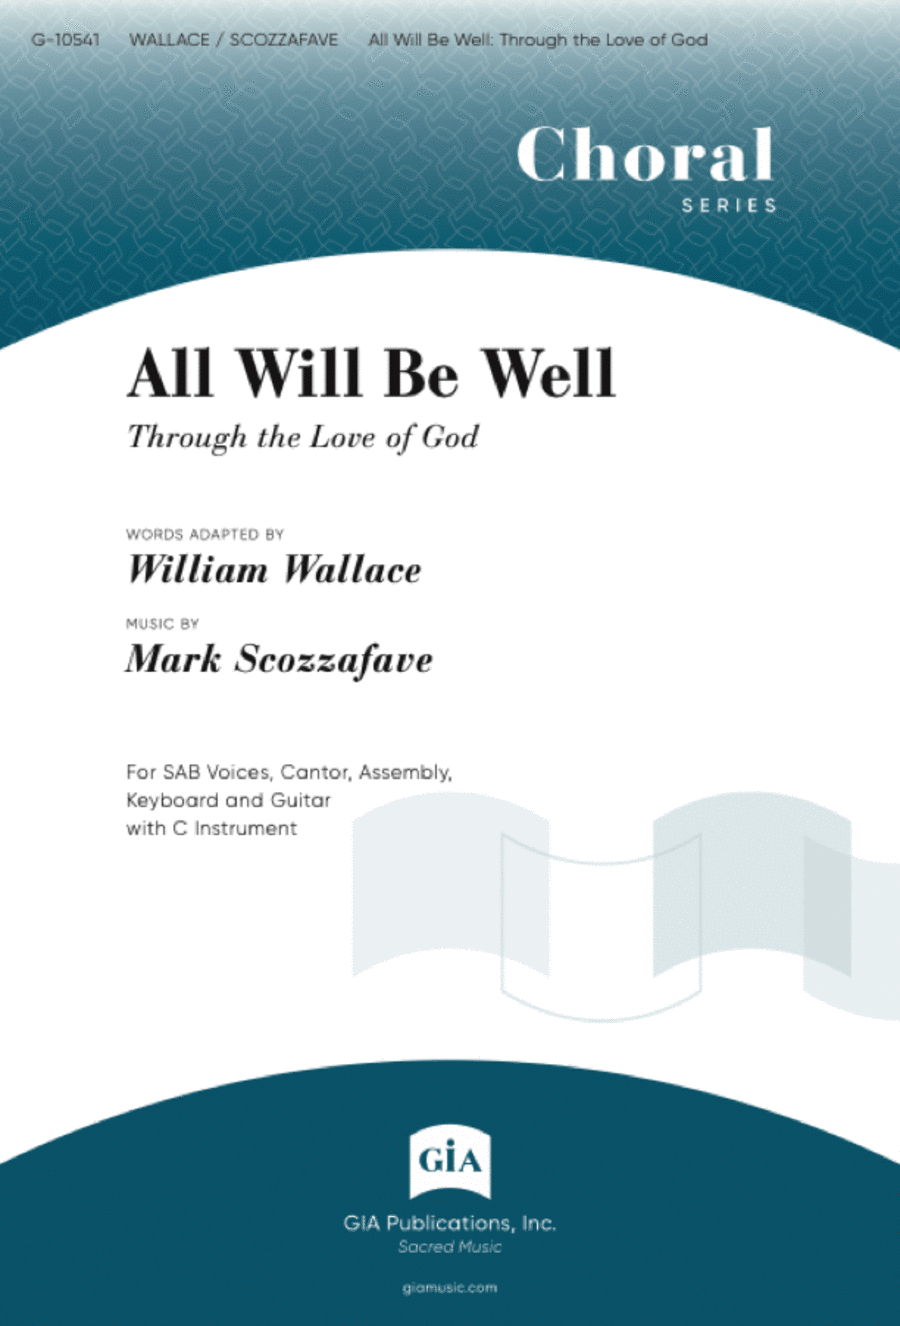 All Will Be Well - Guitar edition